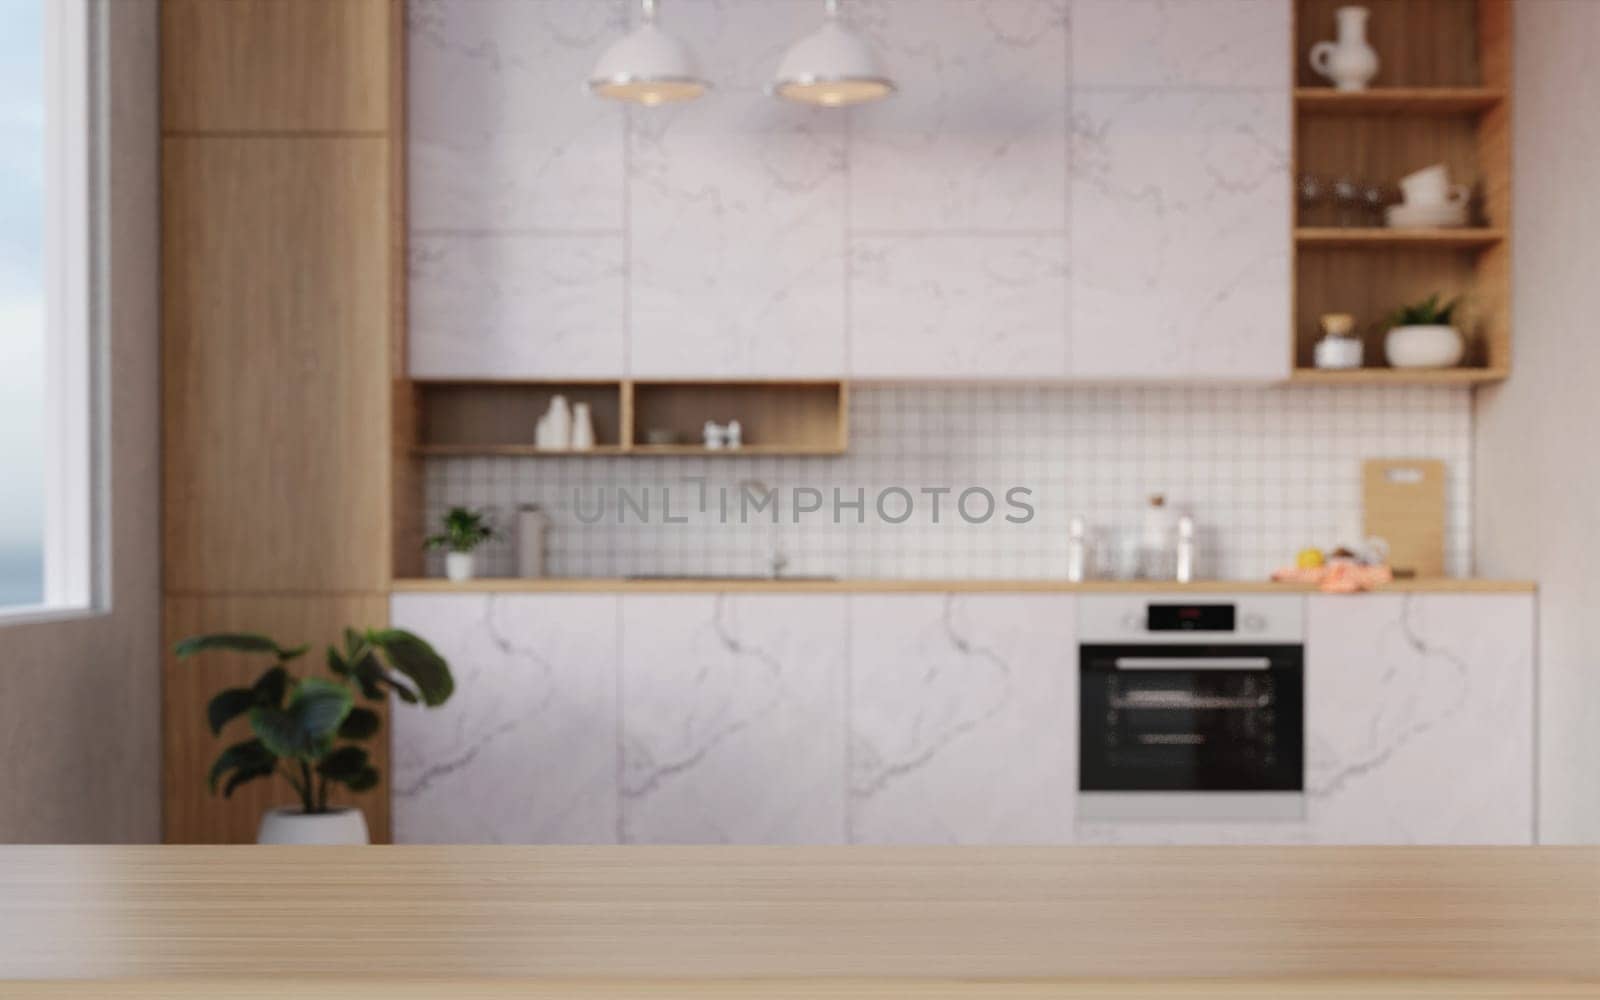 Stylish top tabletop on wooden platform with copy space at blurry kitchen utensils and dishes on light wall background. 3D render illustration by meepiangraphic